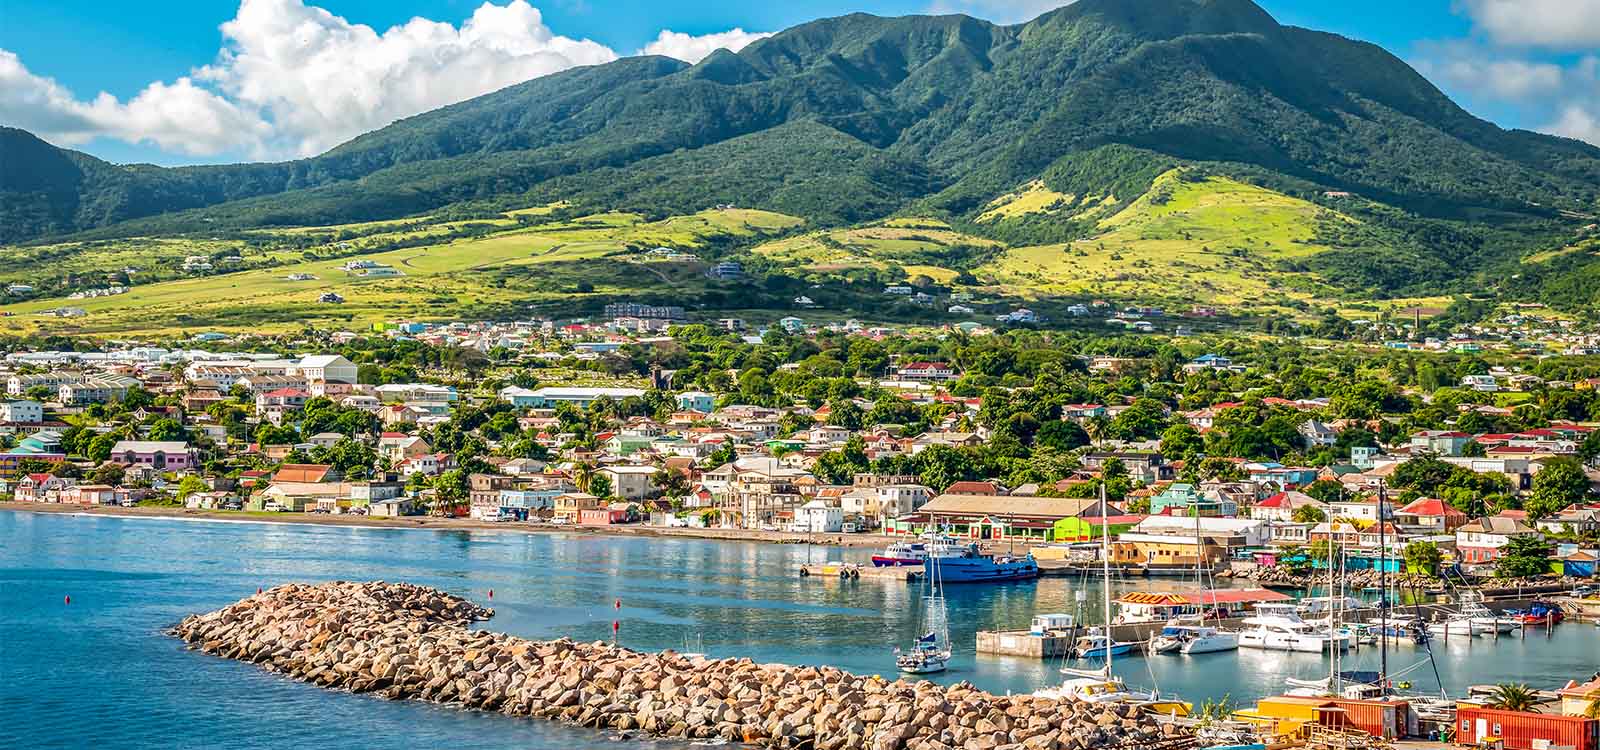 St Kitts and Nevis Citizenship by Investment Program